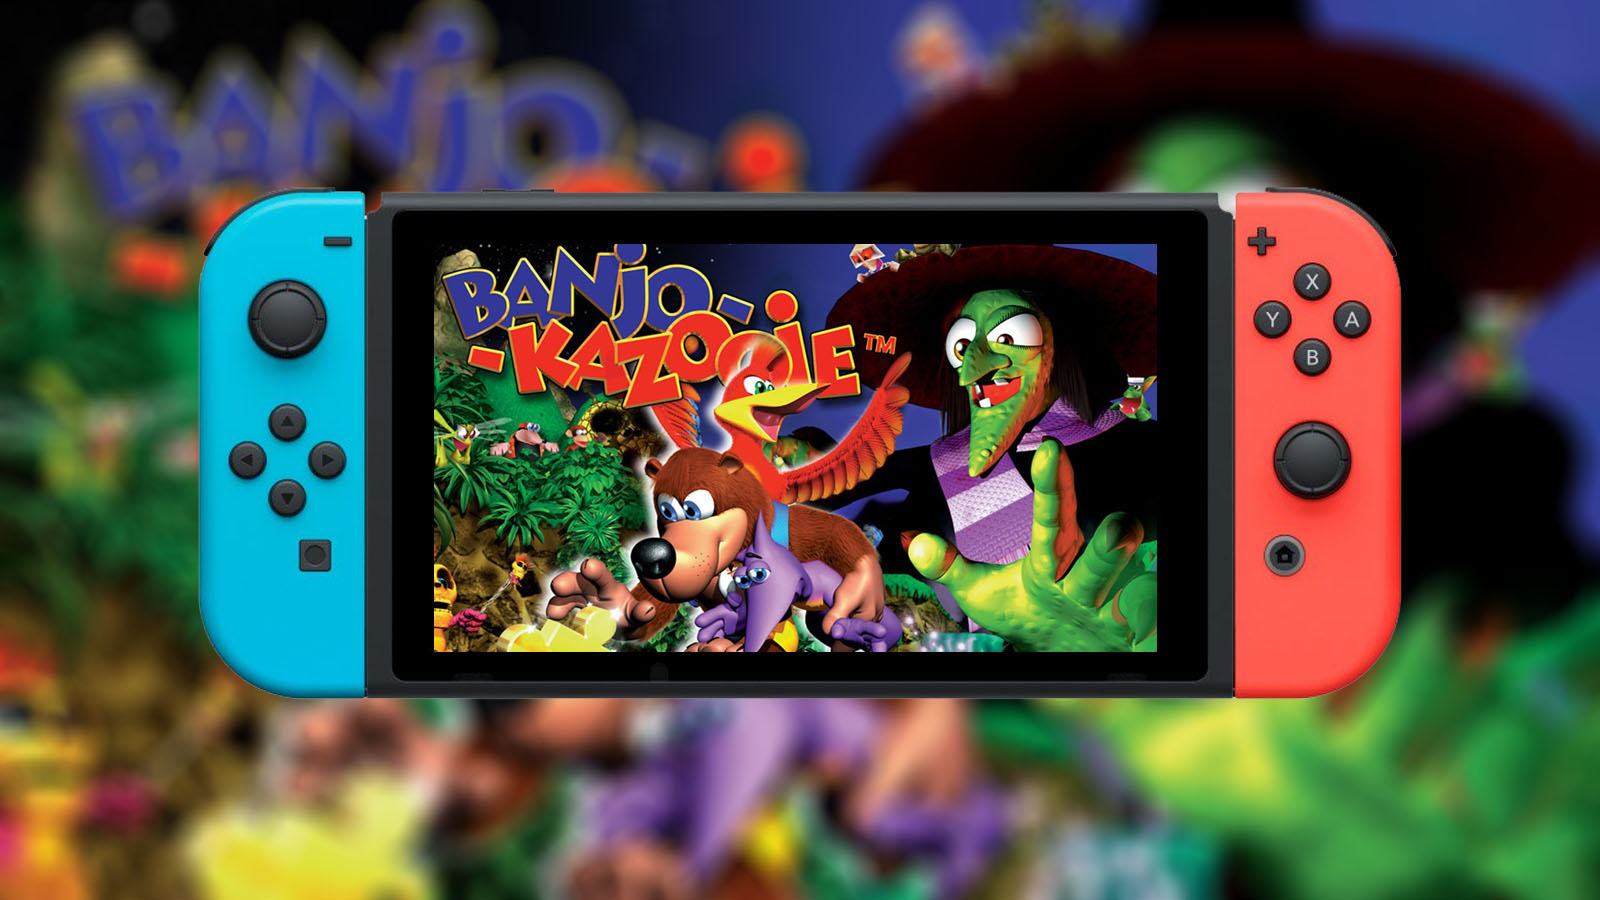 Banjo-Kazooie is coming to Nintendo Switch Online in January 2022